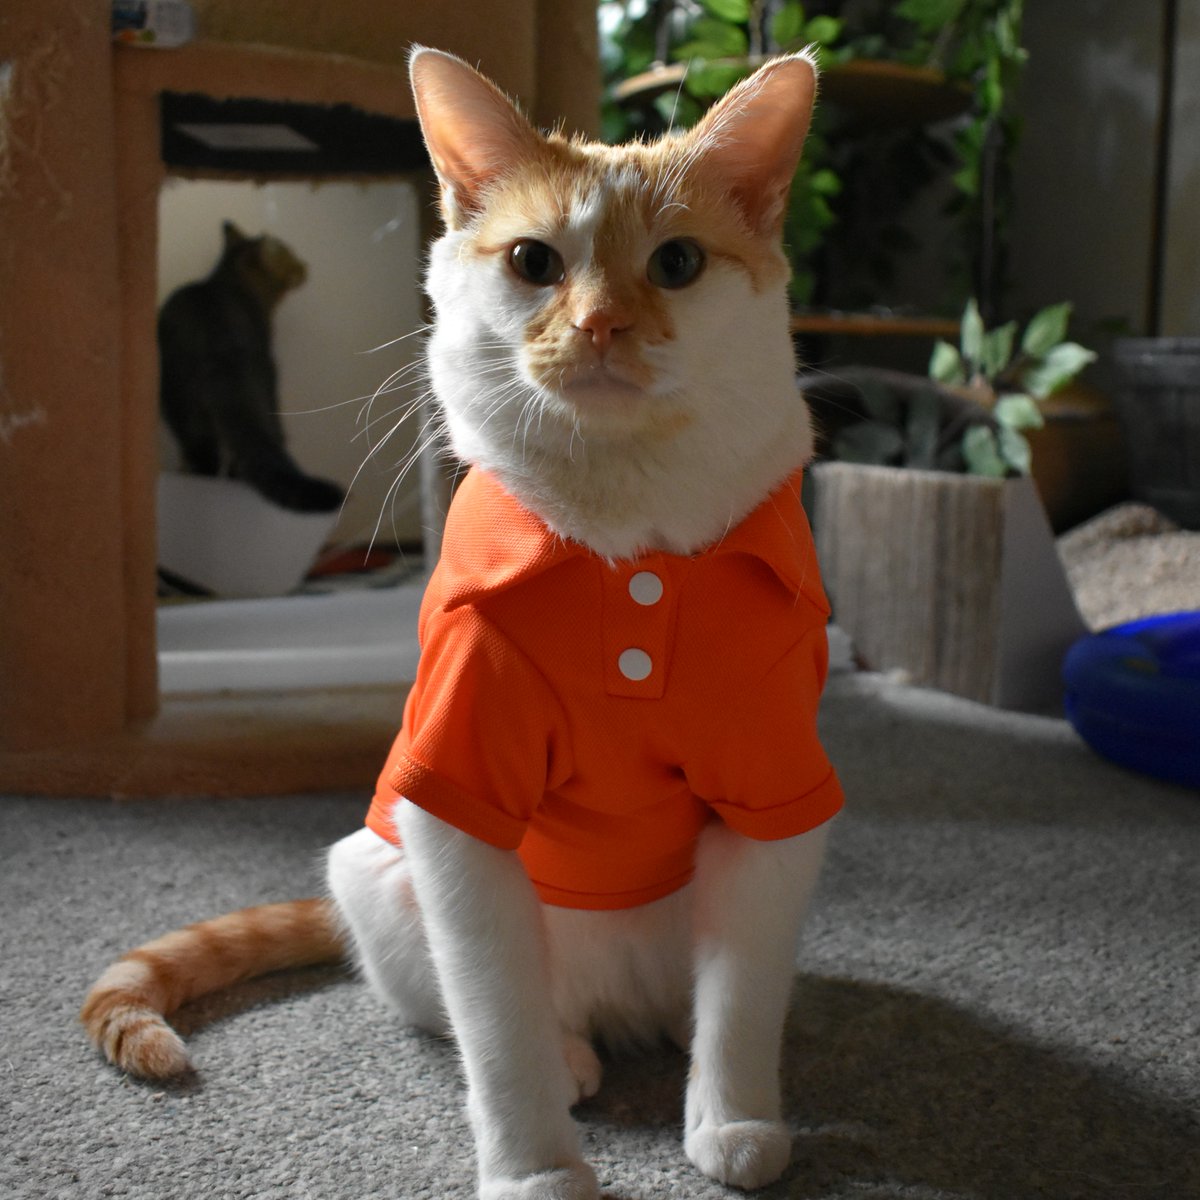 Ebery liddle hoomin matters

Ebery single one
Of ebery size
Of ebery kolor

No matter ware dey live
No matter who dere pawents is
No matter how many toys dey gots

Dey shud neber be hurted
Dey shud neber be forgotted

Cuz ebery liddle hoomin matters

#OrangeShirtDay